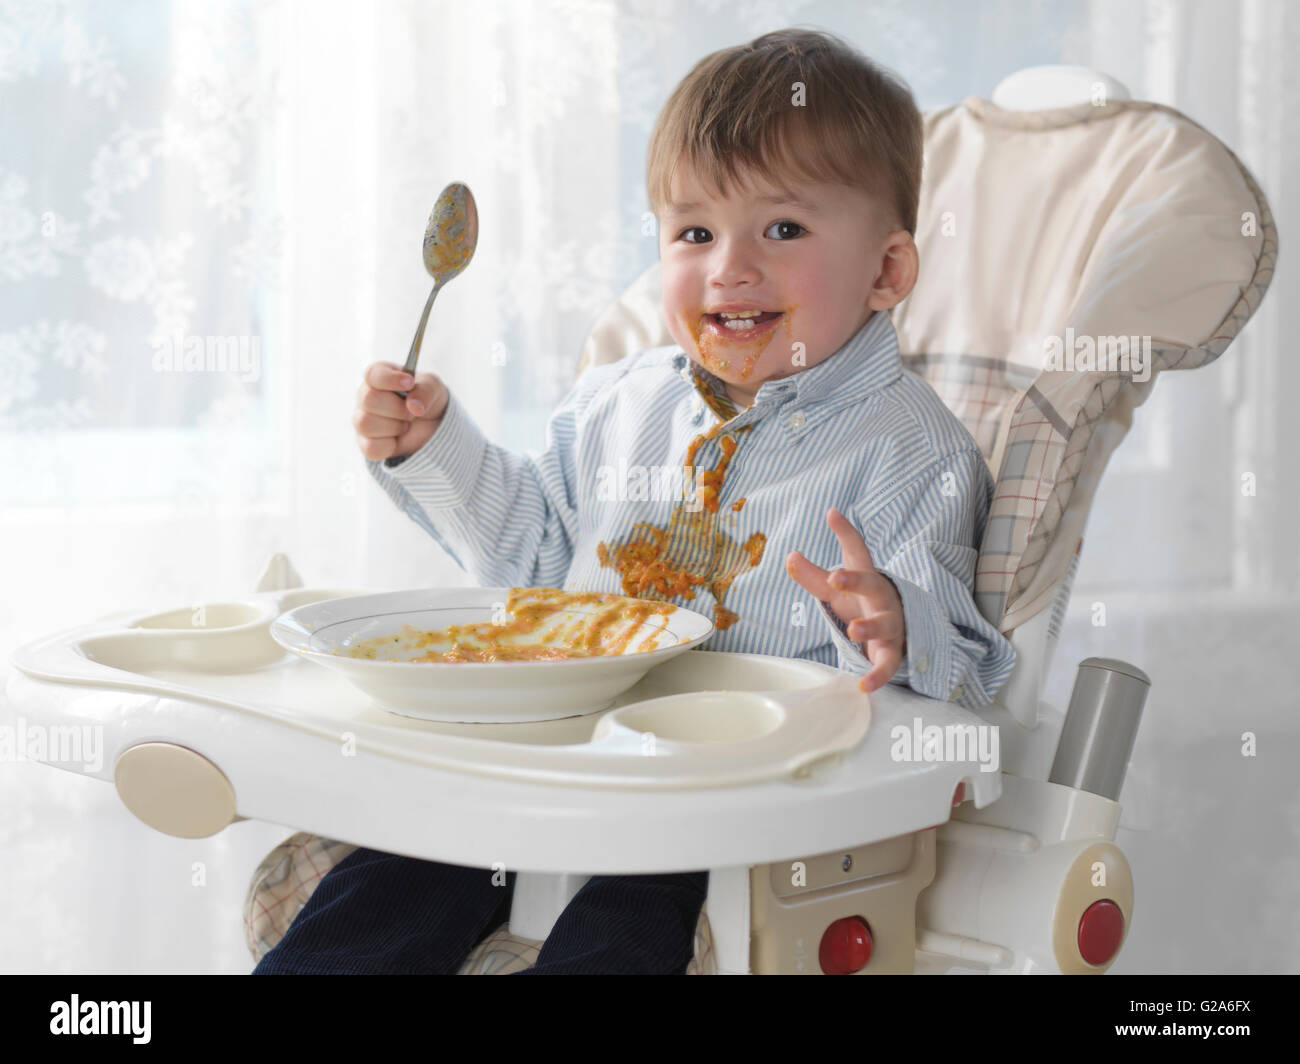 Toddler Boy Sitting In A High Chair Eating Soup With A Spoon